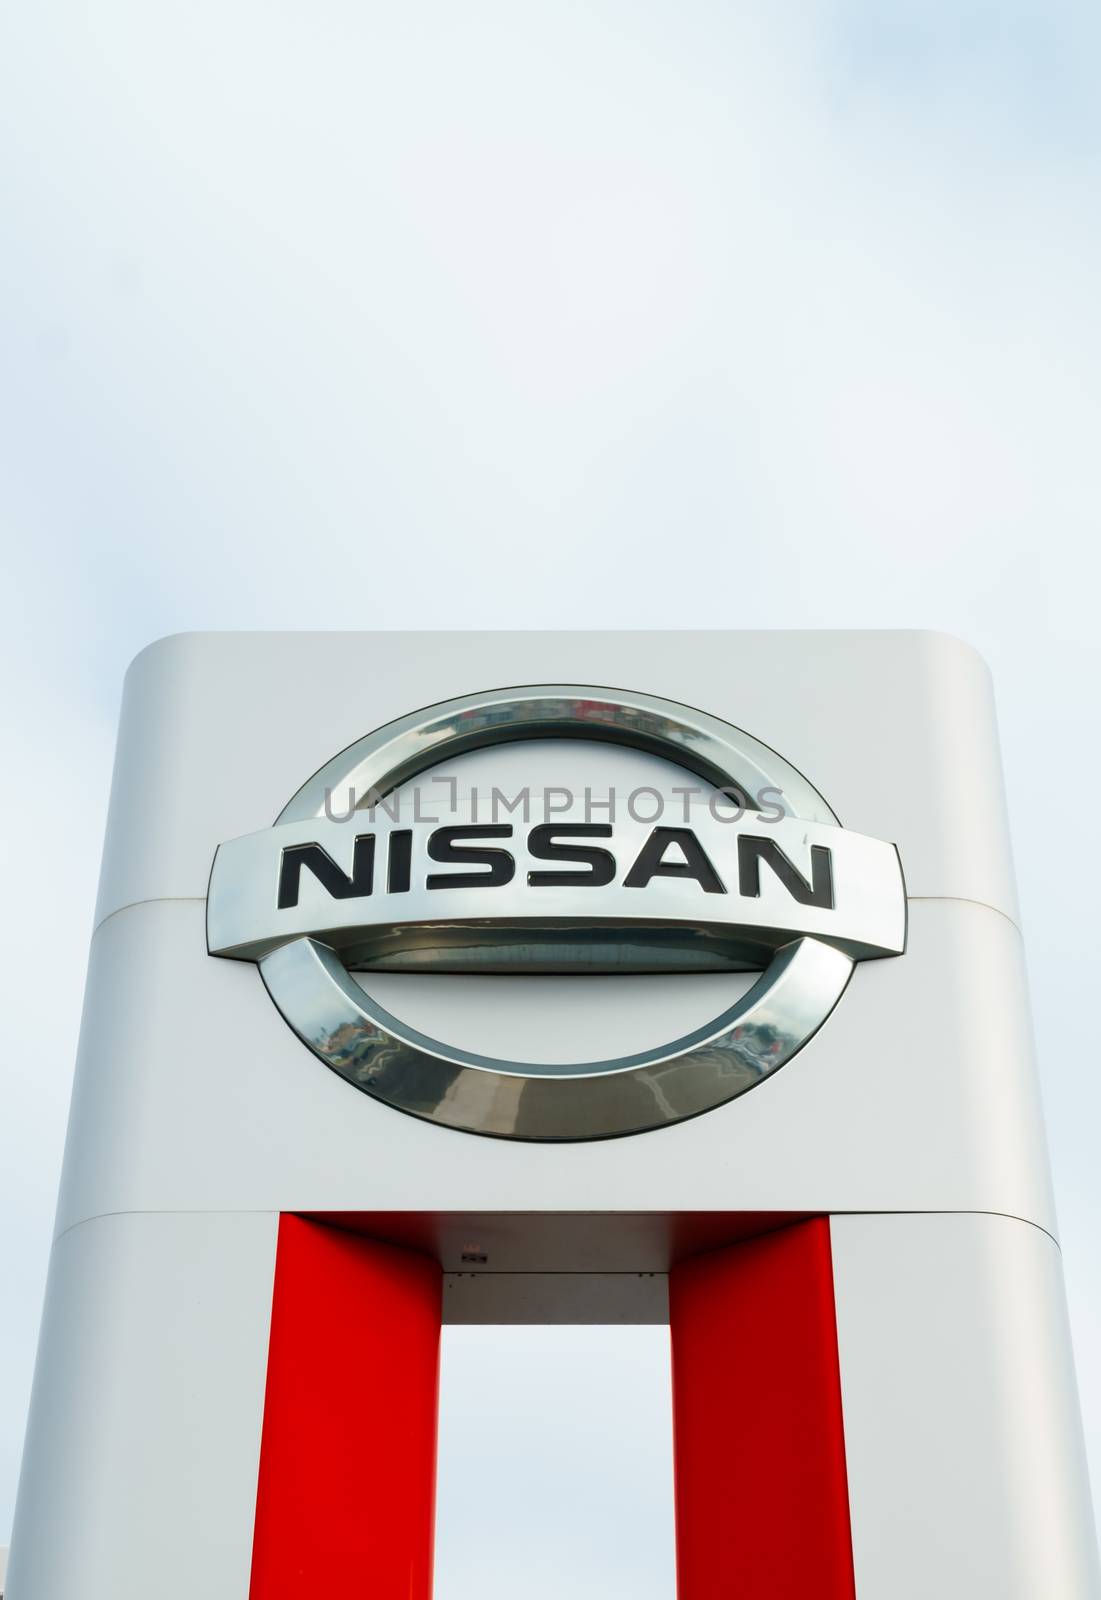  Nissan Motors Automobile Dealership Sign by wolterk